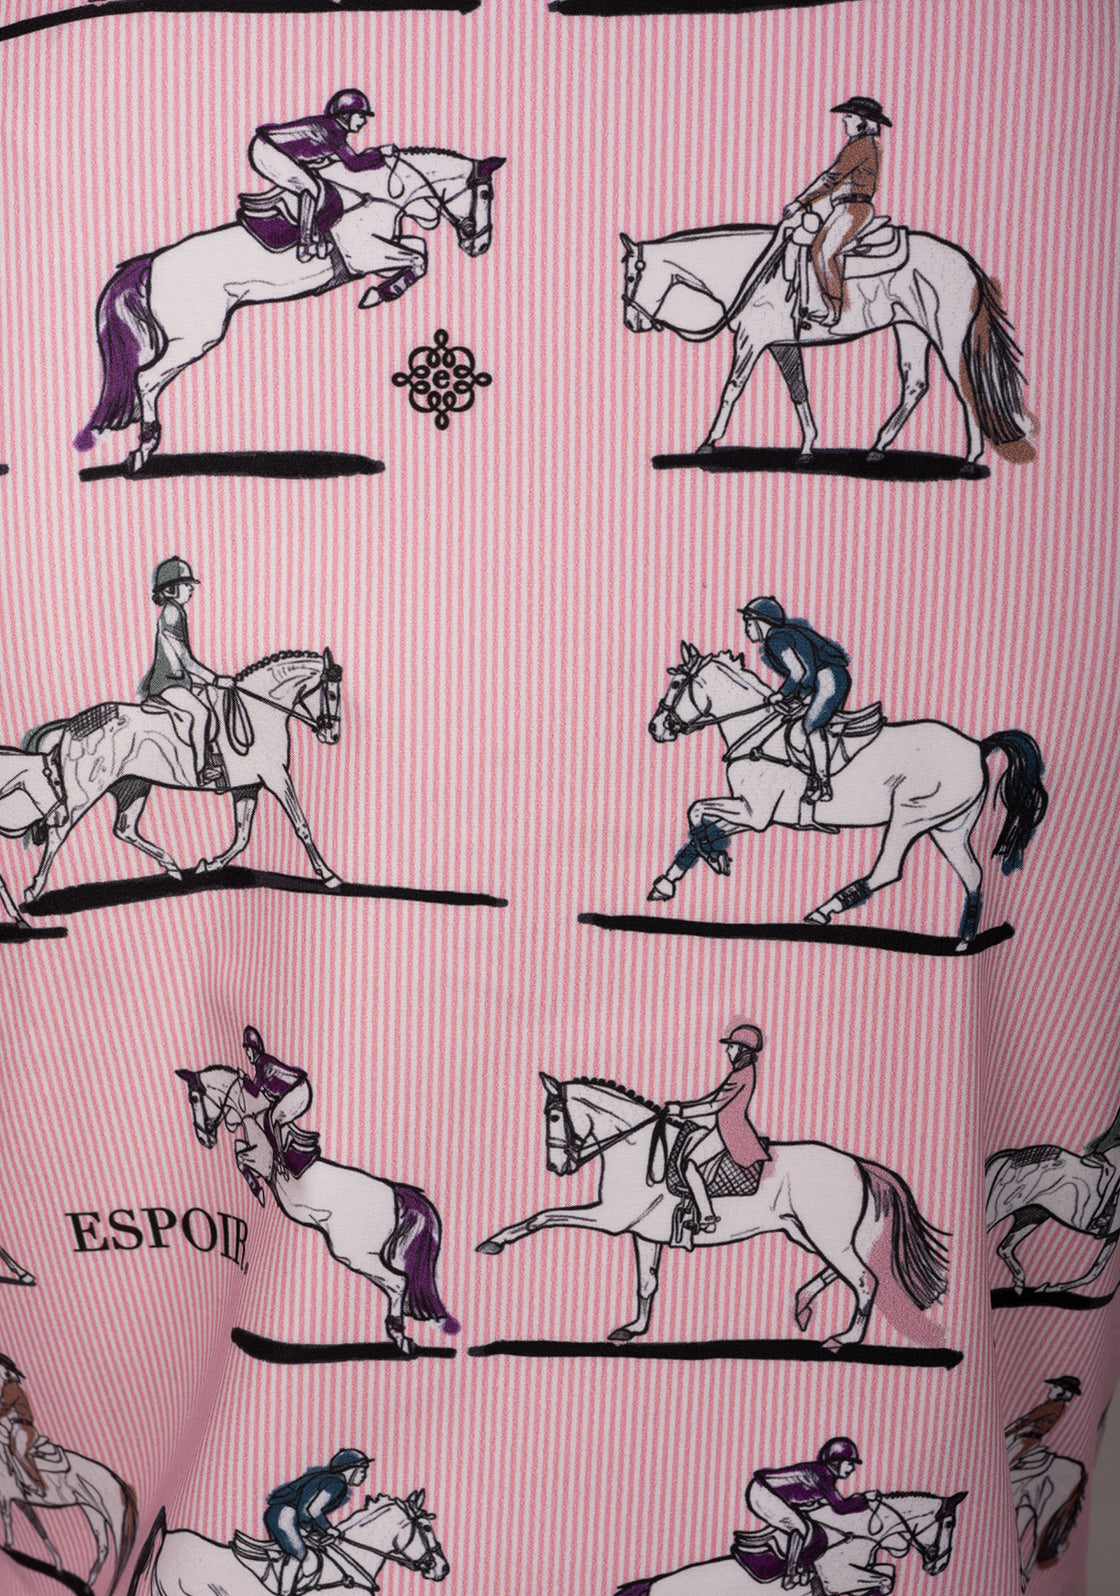 United Equestrian on Pink Ladies Button Shirt